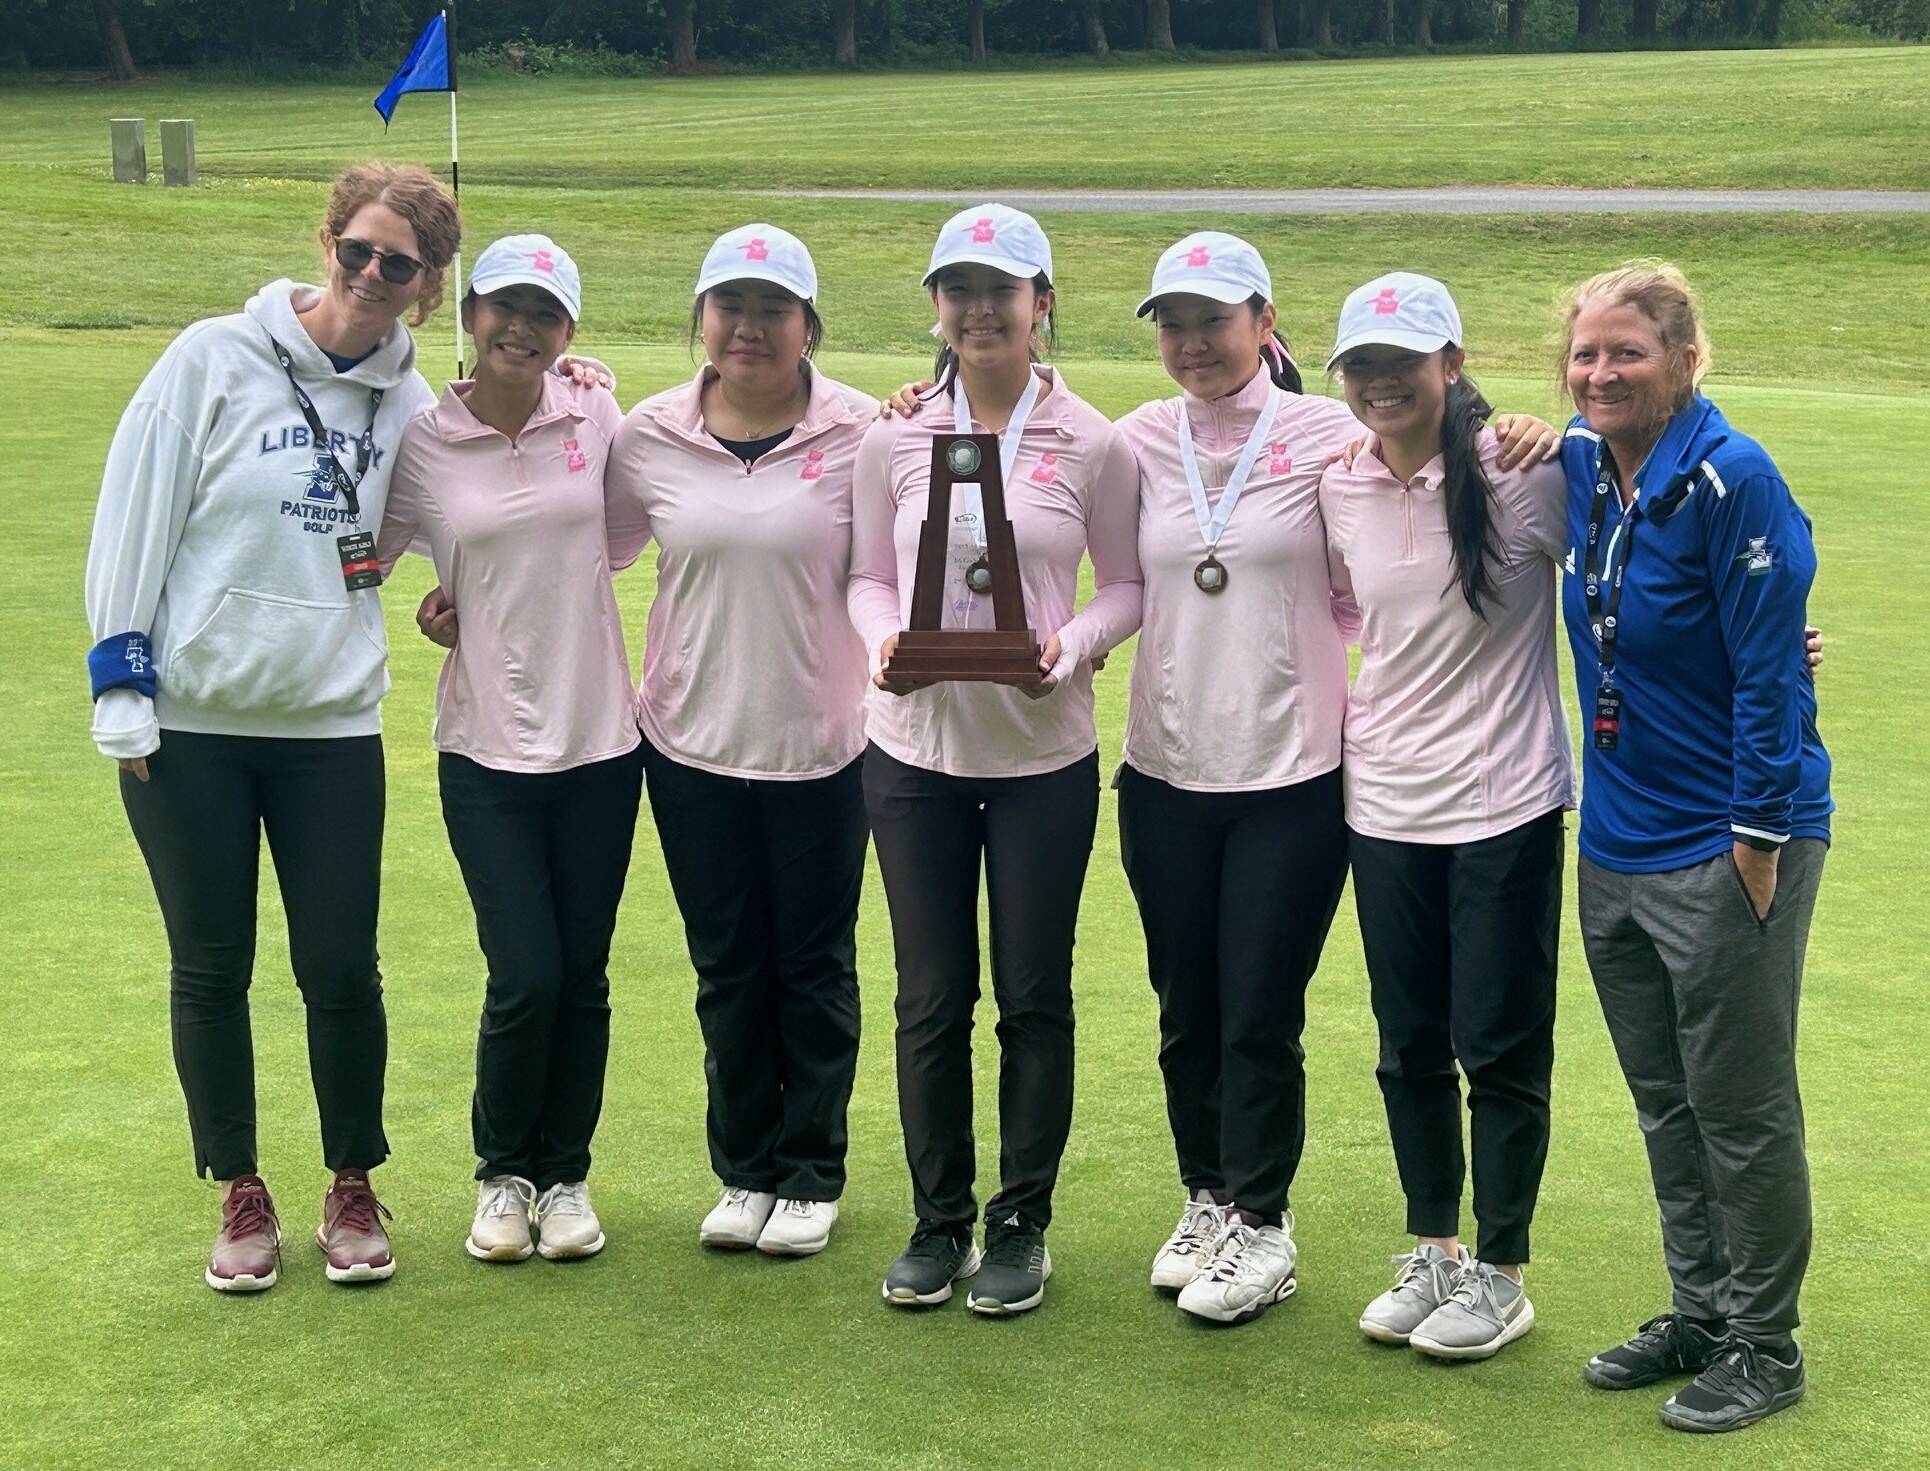 Liberty girls golf team took second in state. Photo provided by Matthew Stuart.